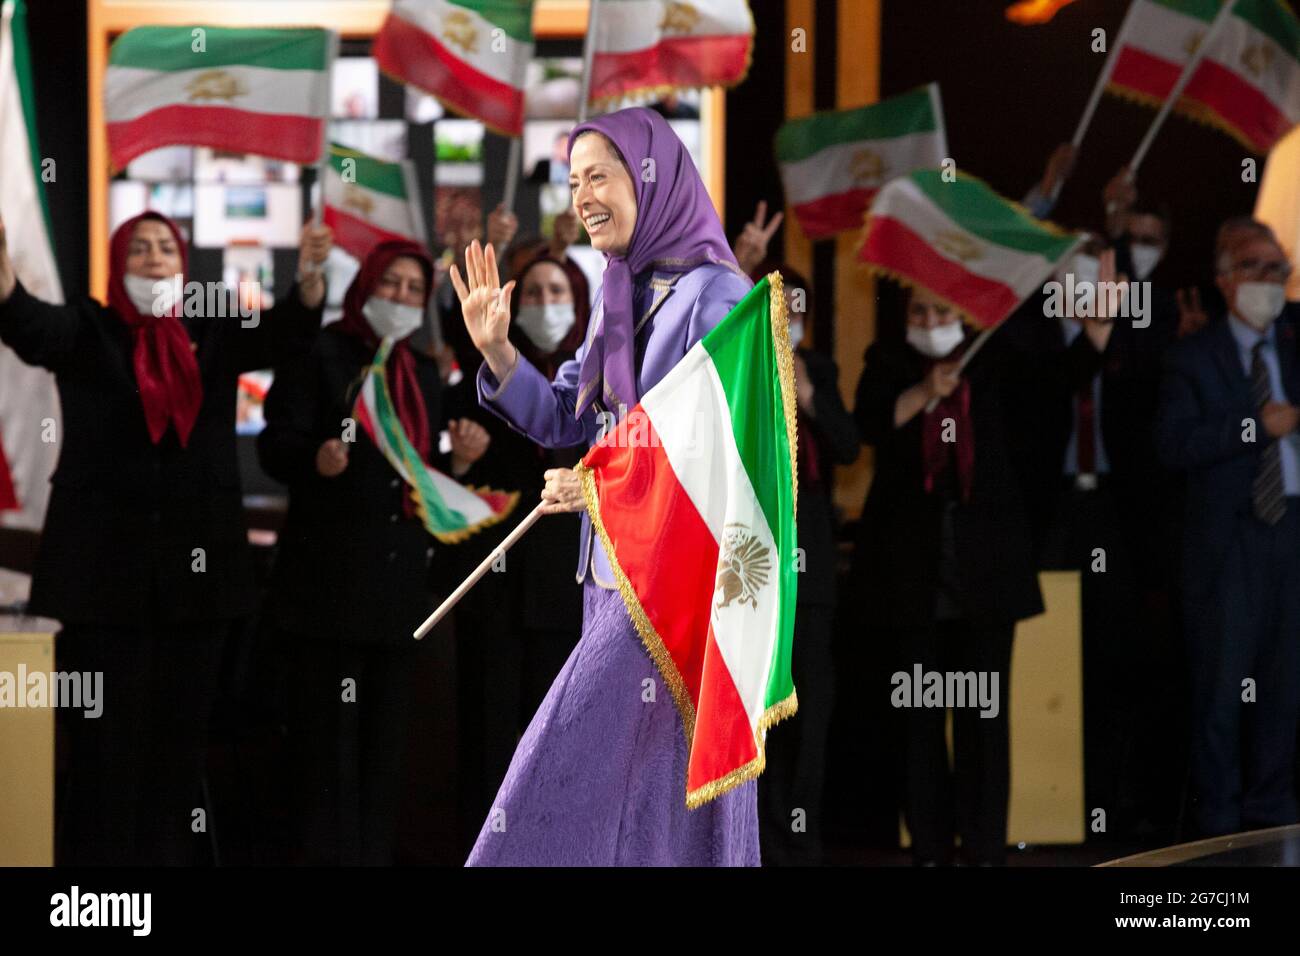 Maryam Rajavi, Ashraf-3, Albania, 12/07/2021 - Maryam Rajavi, President-elect of National Council of Resistance of Iran (NCRI), waving the Iranian flag, on the third day of the Free Iran World Summit on July 11, 2021 in Ashraf 3 near Tirana., Albania. The third day of the Summit featured former prime ministers of Italy, Belgium, Sweden, Ireland, and Romania, AG Michael Mukasey, Amb. John Bolton, Mayor Rudy Giuliani, Senator Robert Torricelli, Directors Louis Freeh and James Woolsey and many others. (Photo by Siavosh Hosseini/Pacific Press) Stock Photo